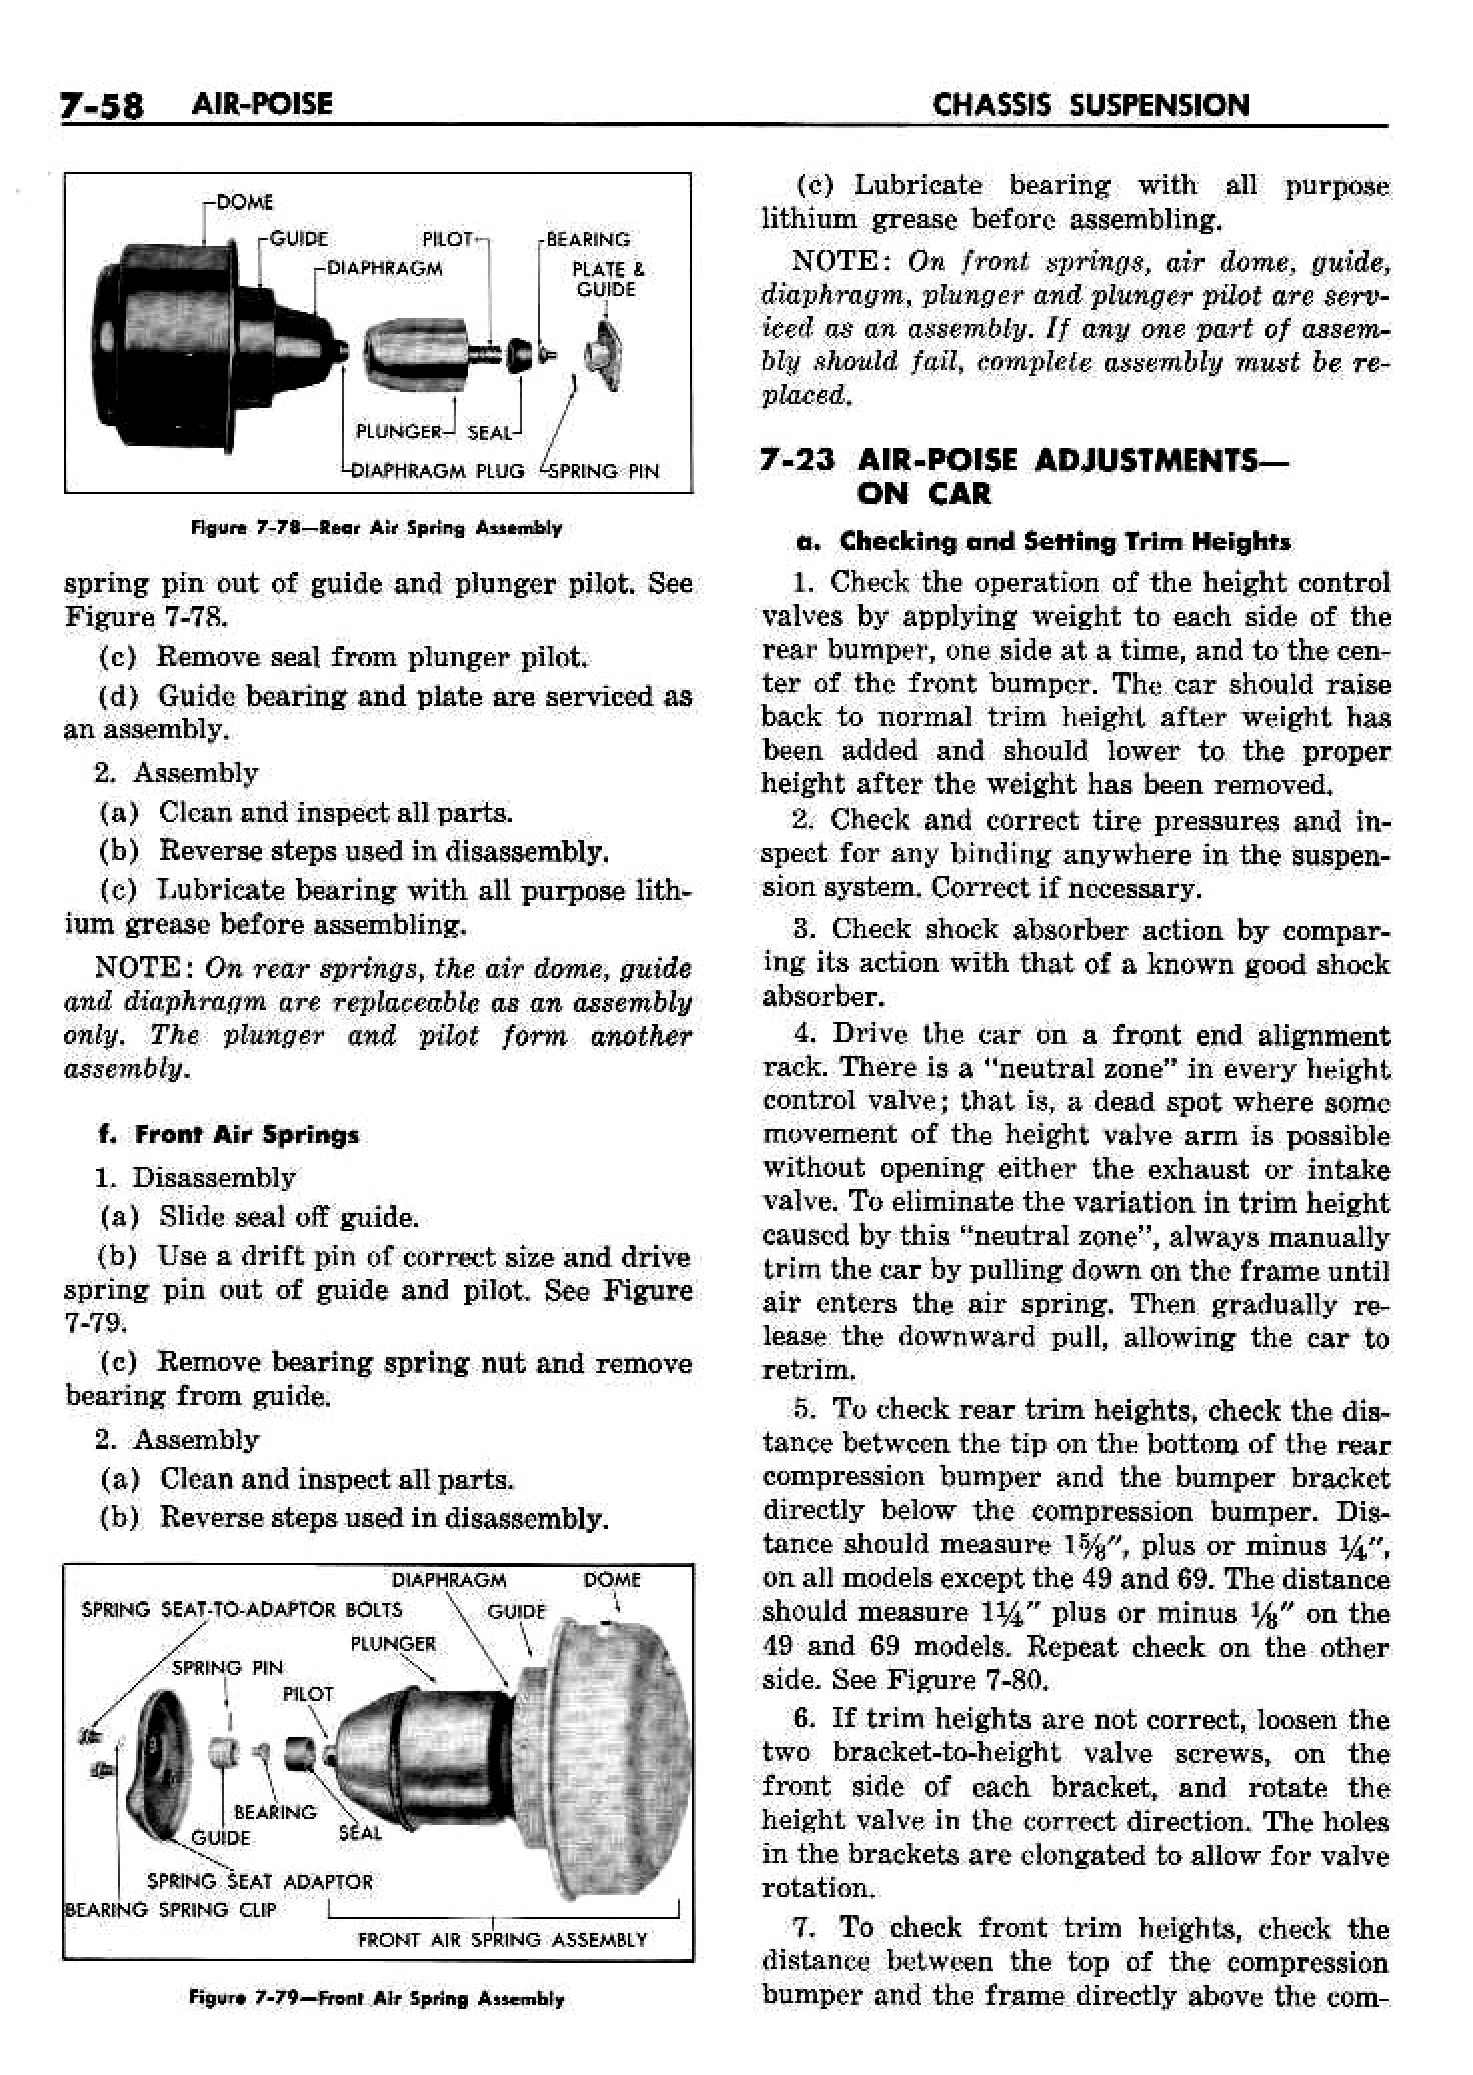 n_08 1958 Buick Shop Manual - Chassis Suspension_58.jpg